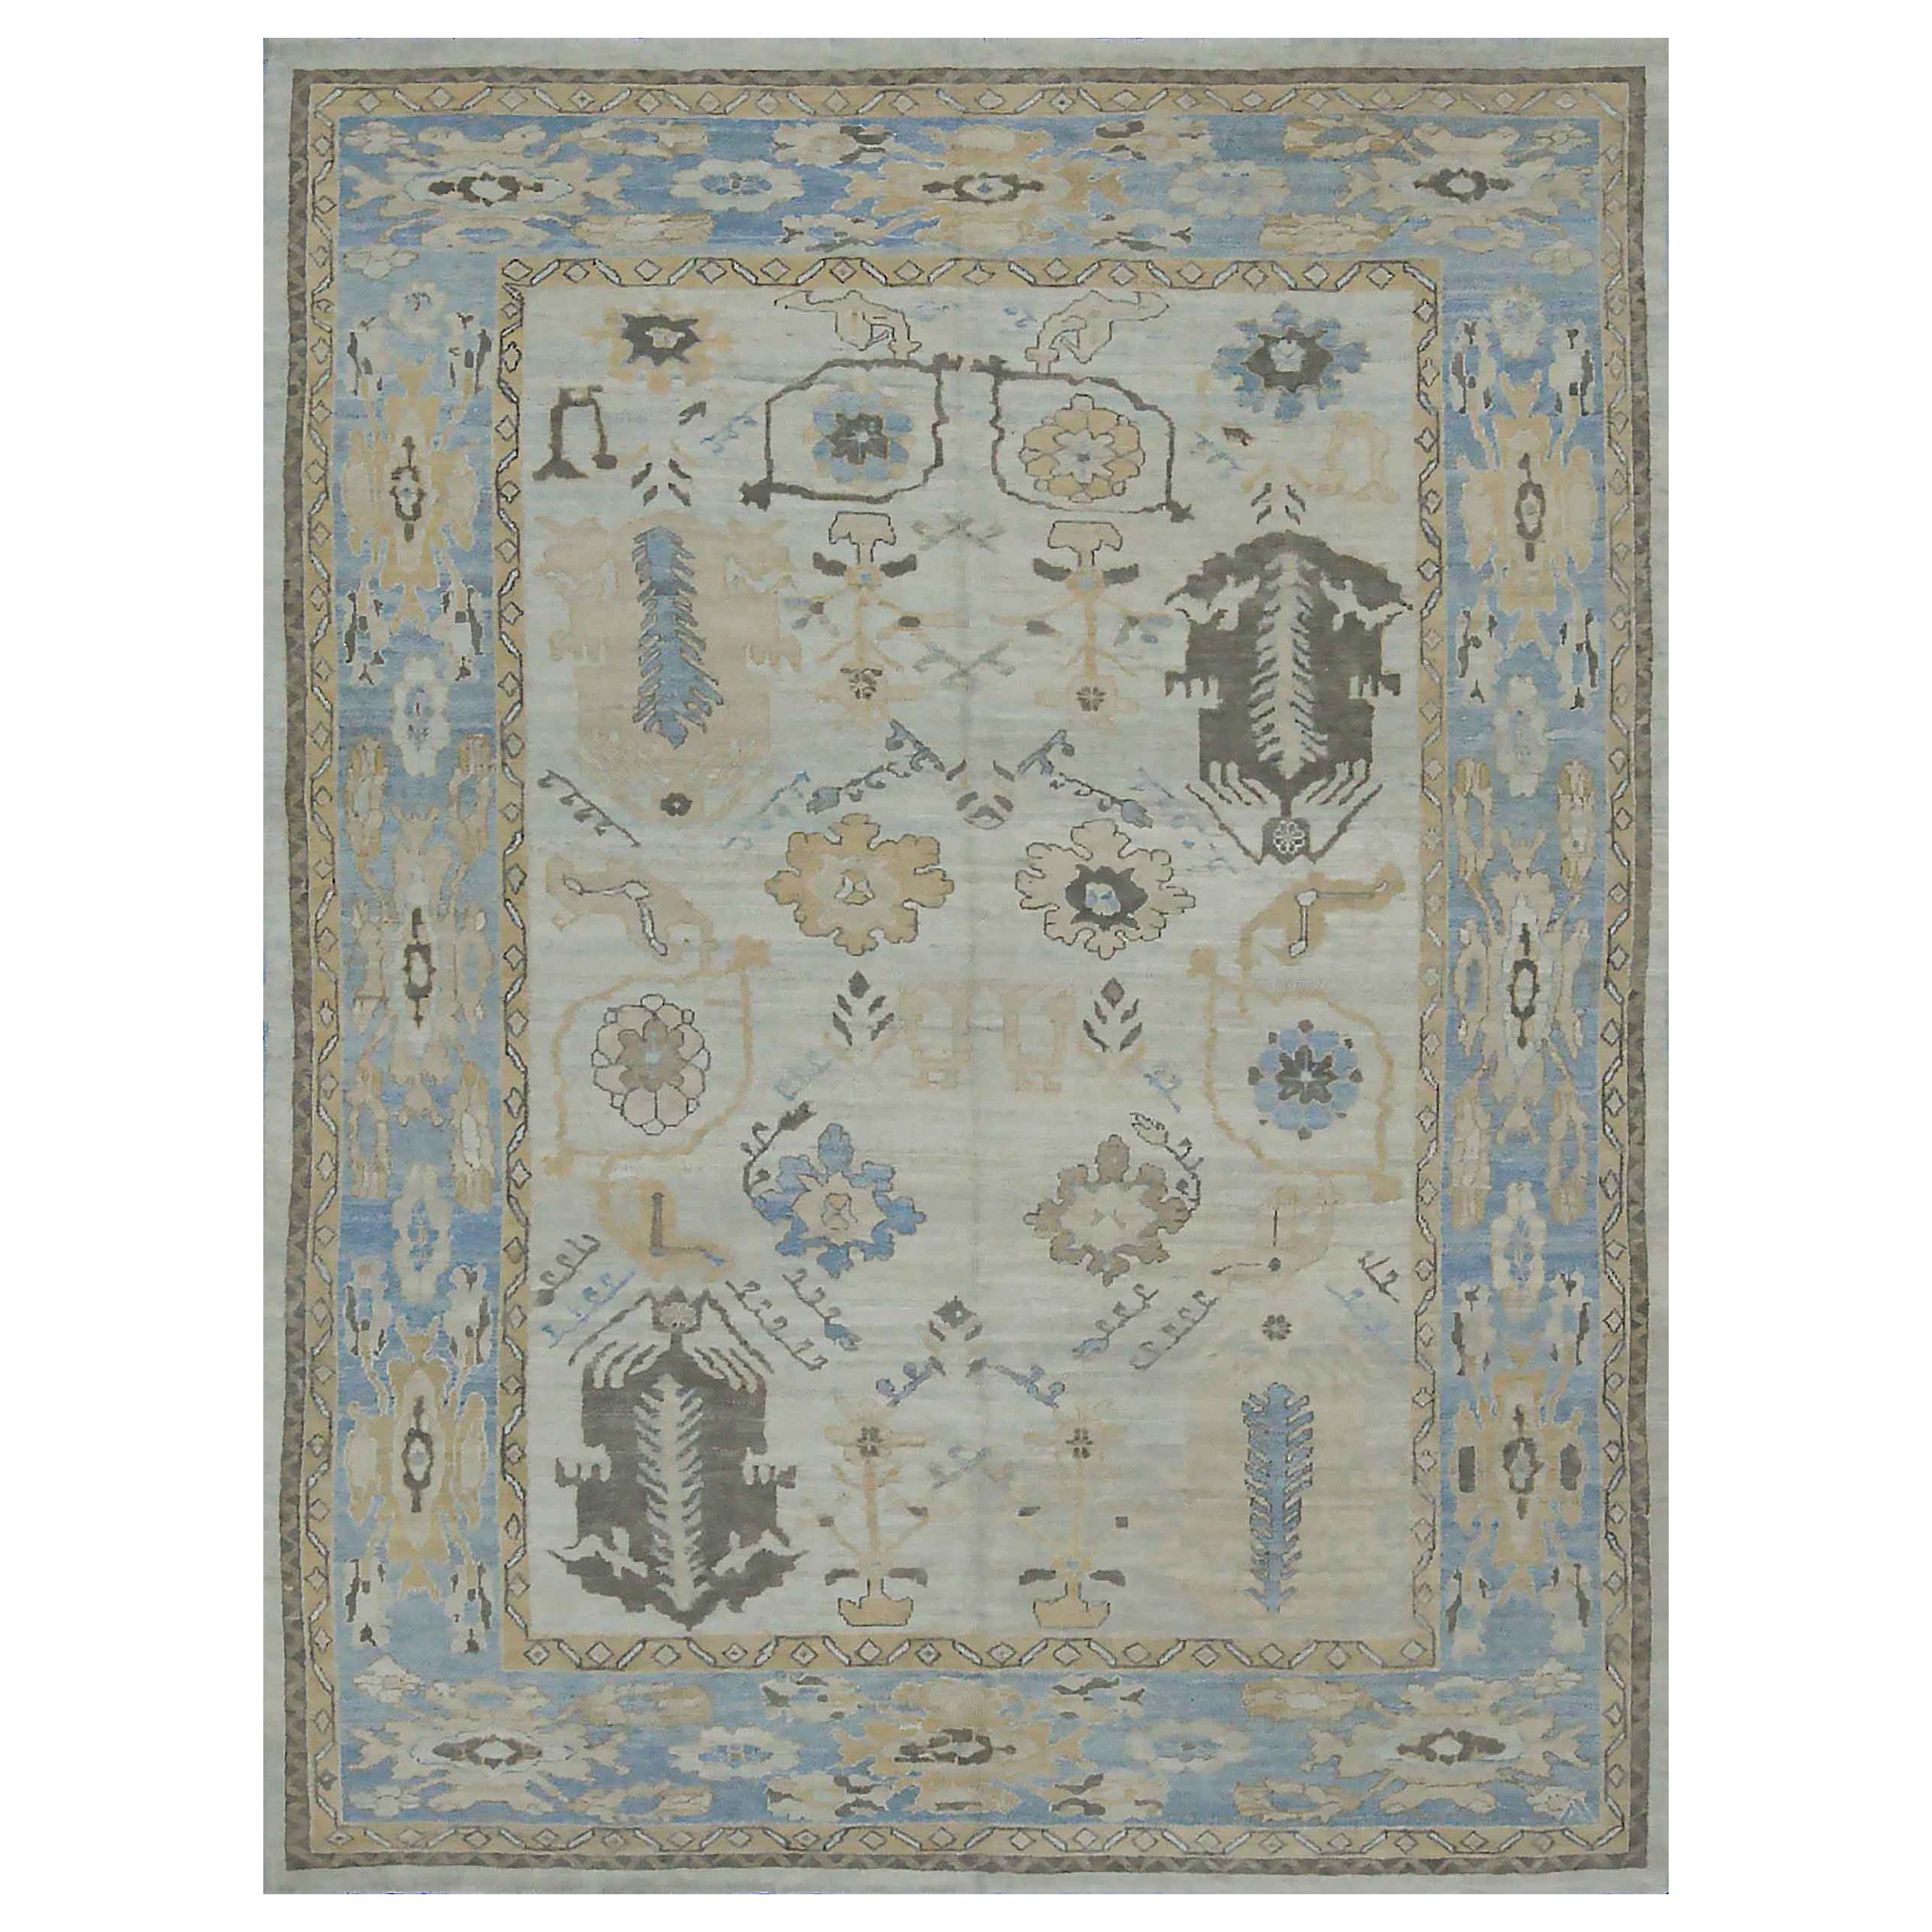 New Turkish Oushak Rug with Gray and Beige Floral Patterns on Blue Field For Sale